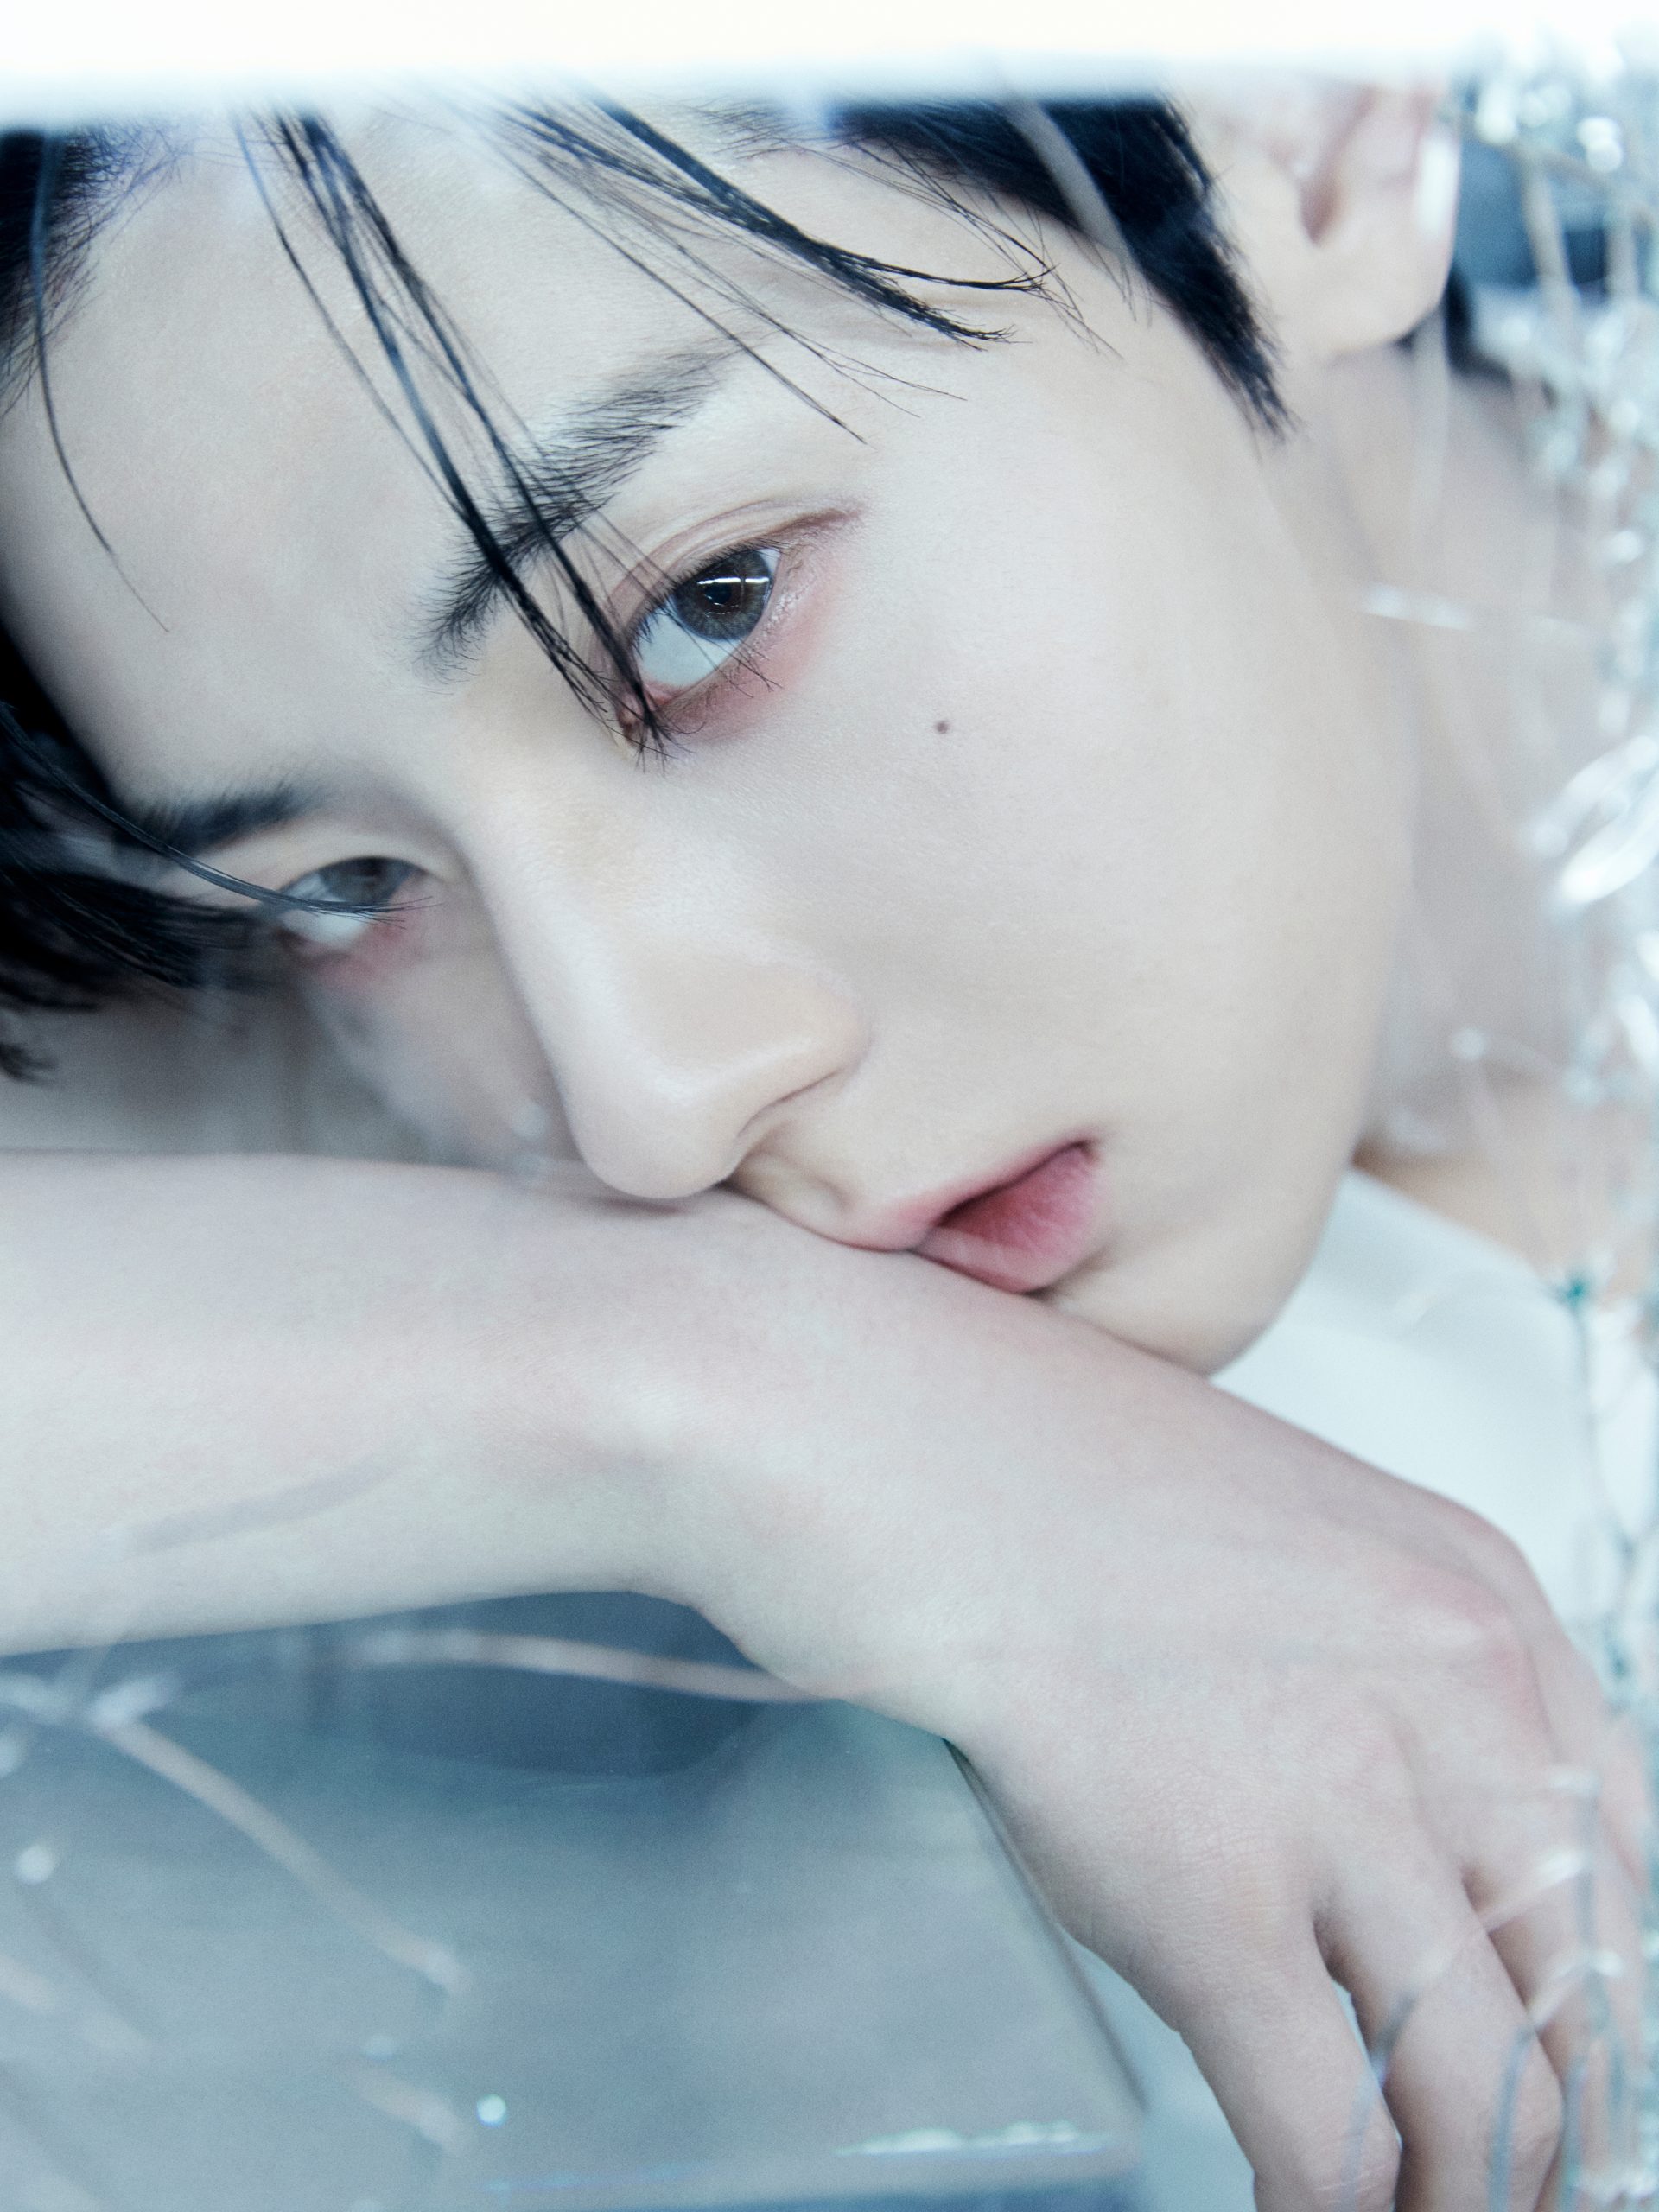 Hwang Minhyun Shines Brighter With Every Novel Encounter